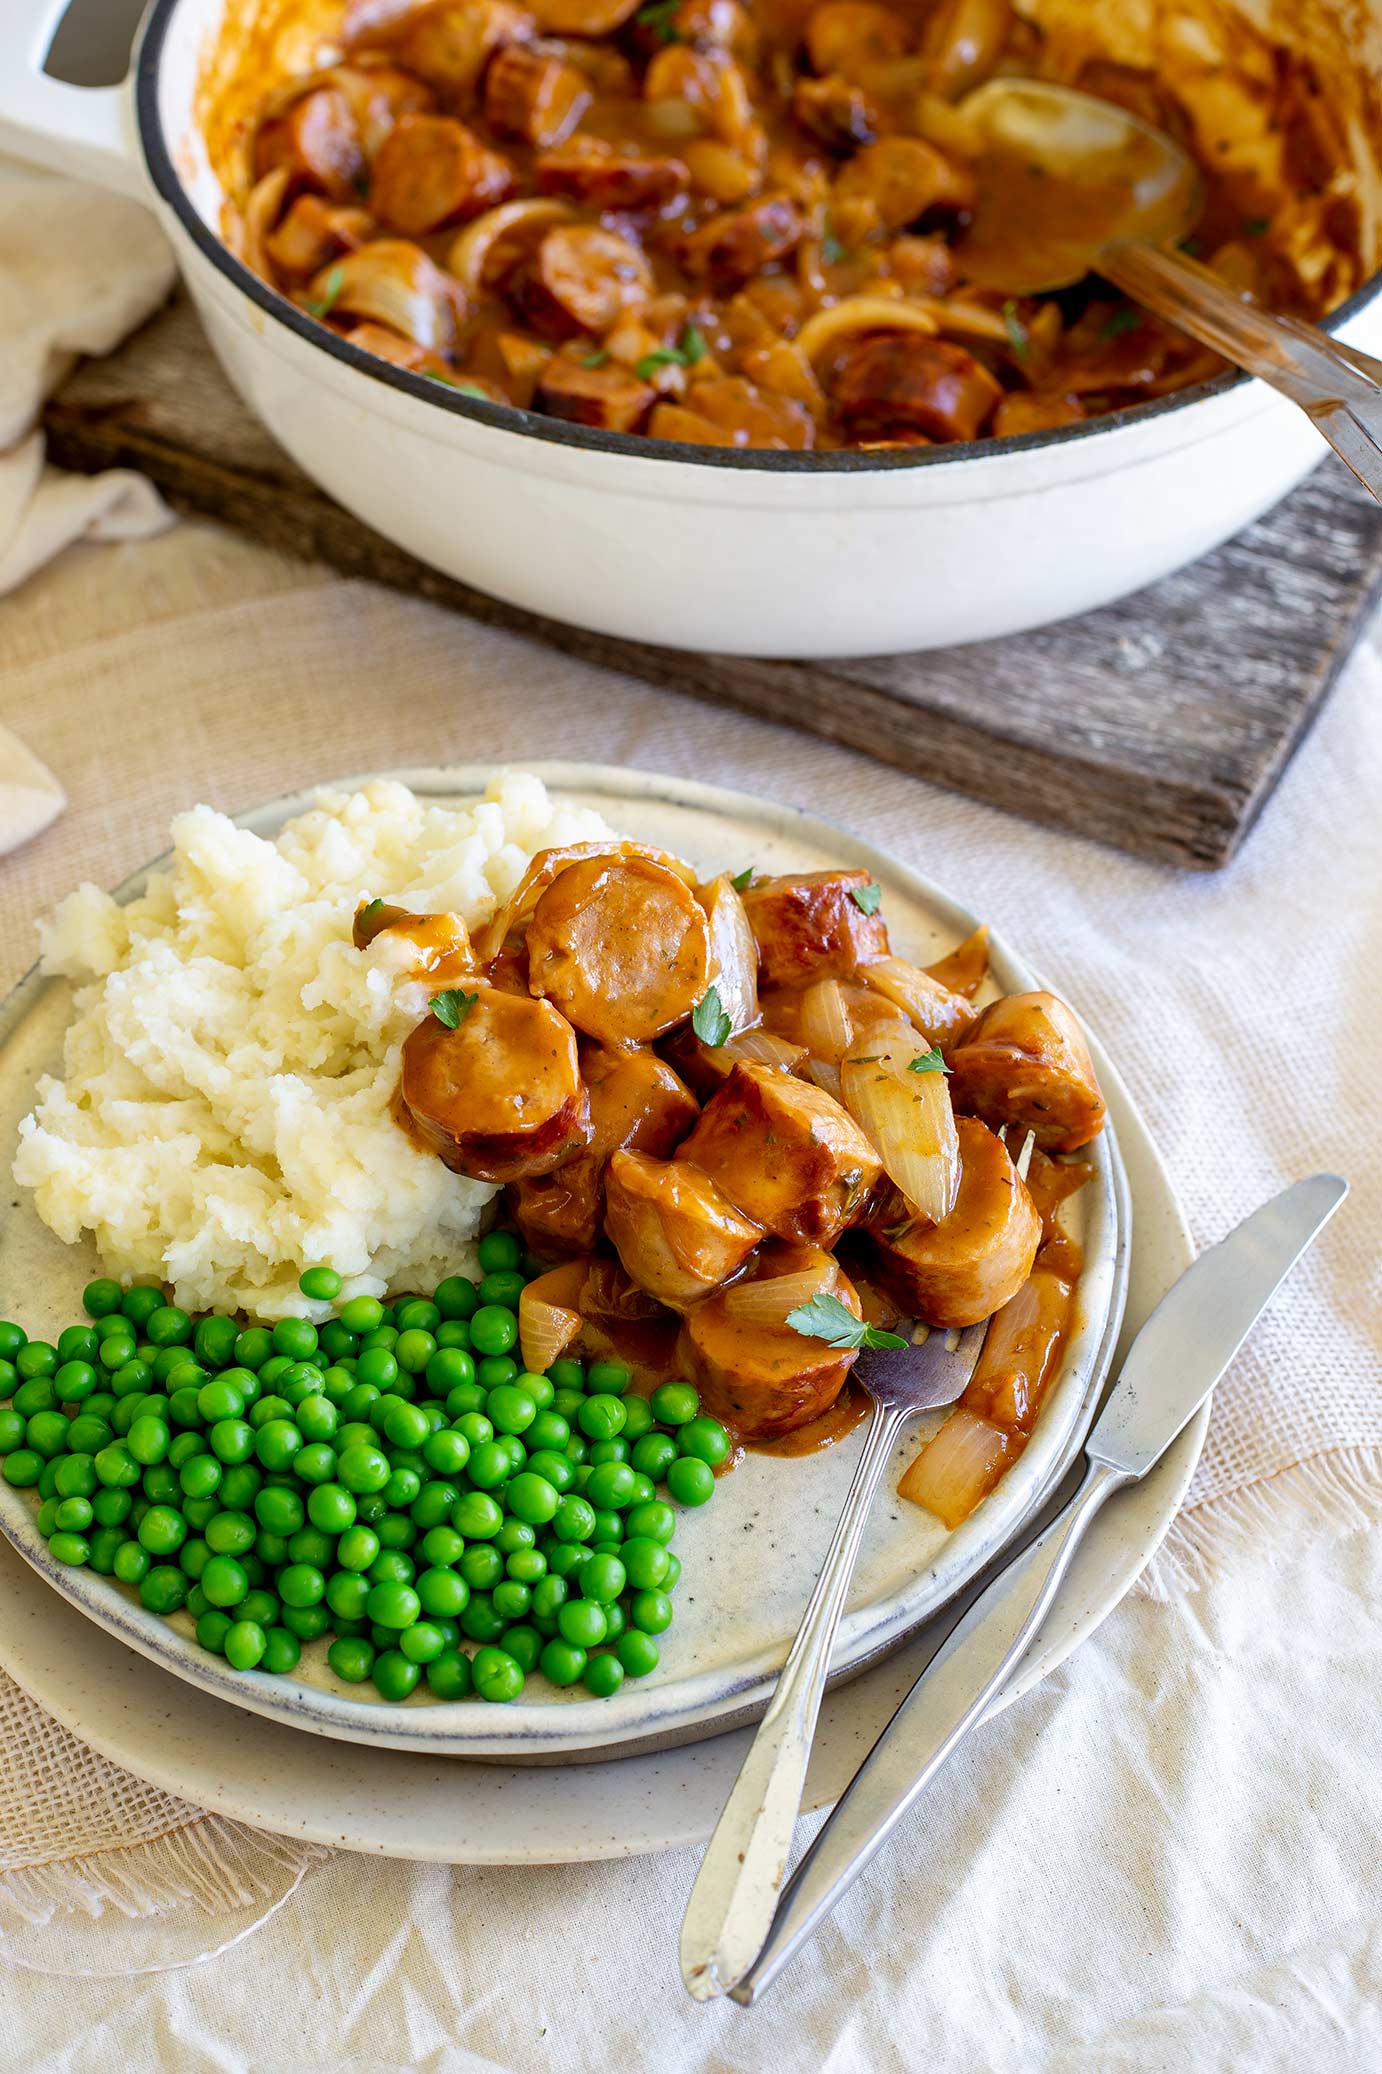 sausage casserole on a plate with mashed potatoes and peas